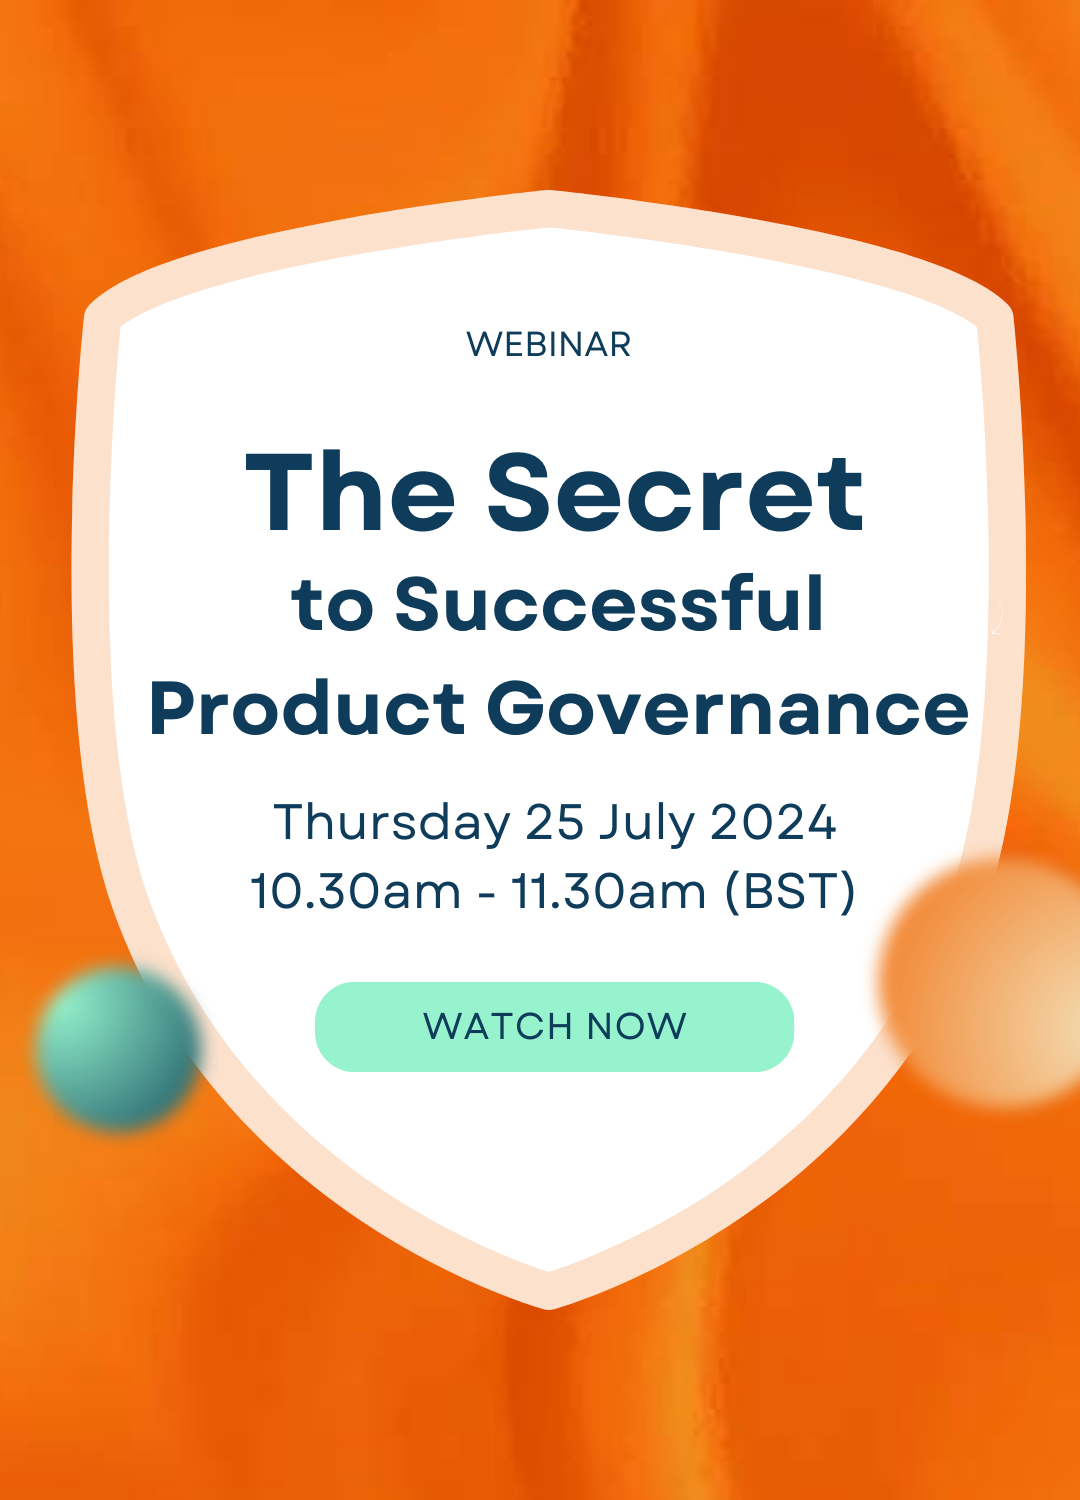 Product Governance - watch now 